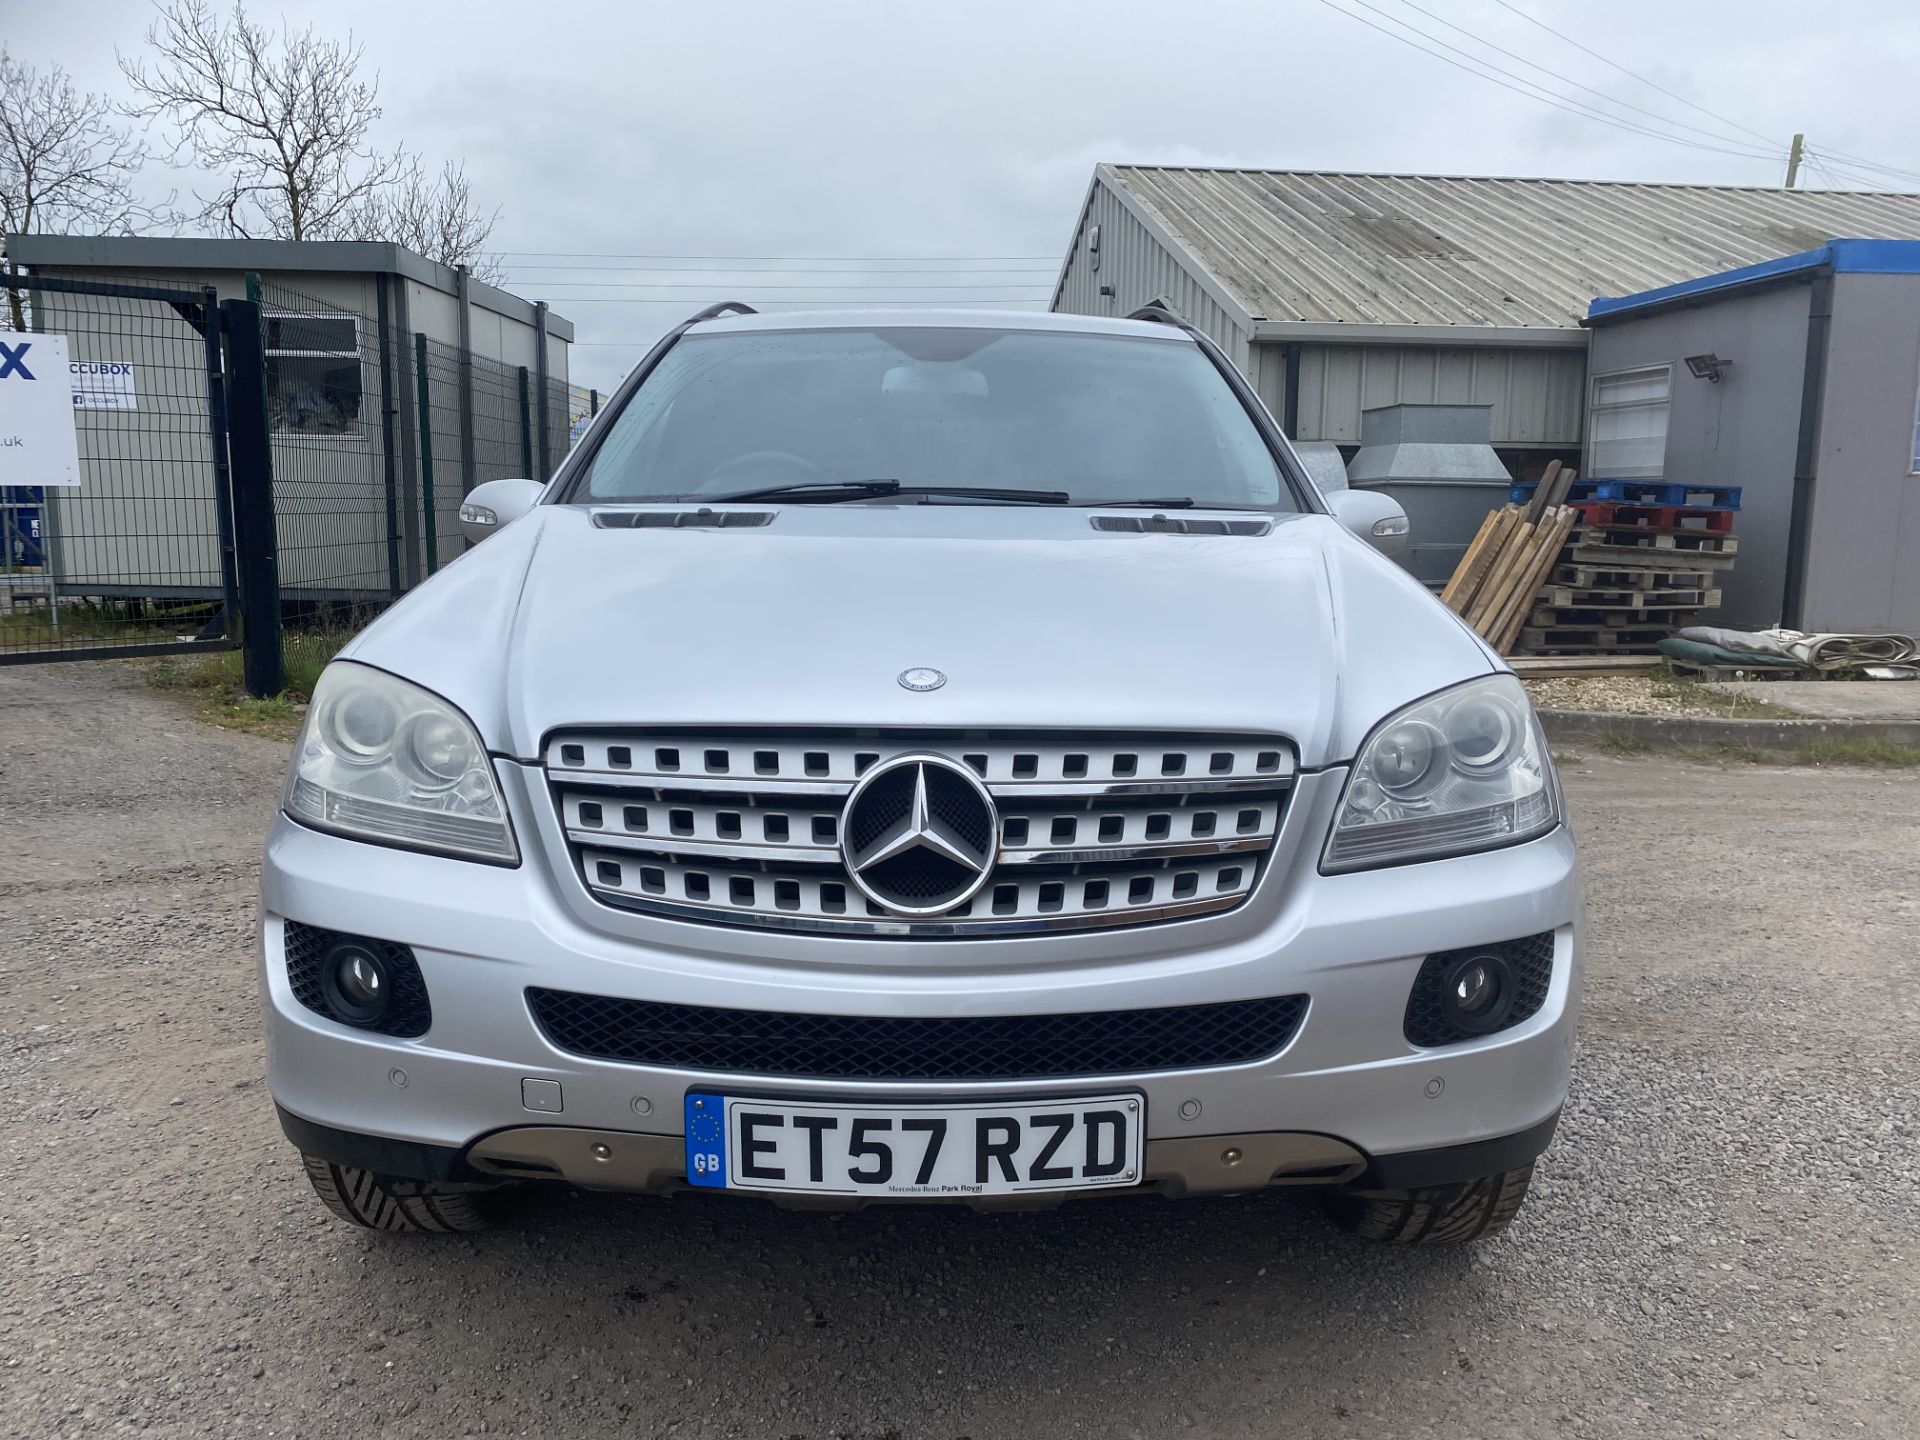 (Reserve Met) Mercedes ML280 Cdi (SPORT) Auto 3.0v6 Diesel - 2008 Reg - Only 94000 Miles Fsh Leather - Image 3 of 21